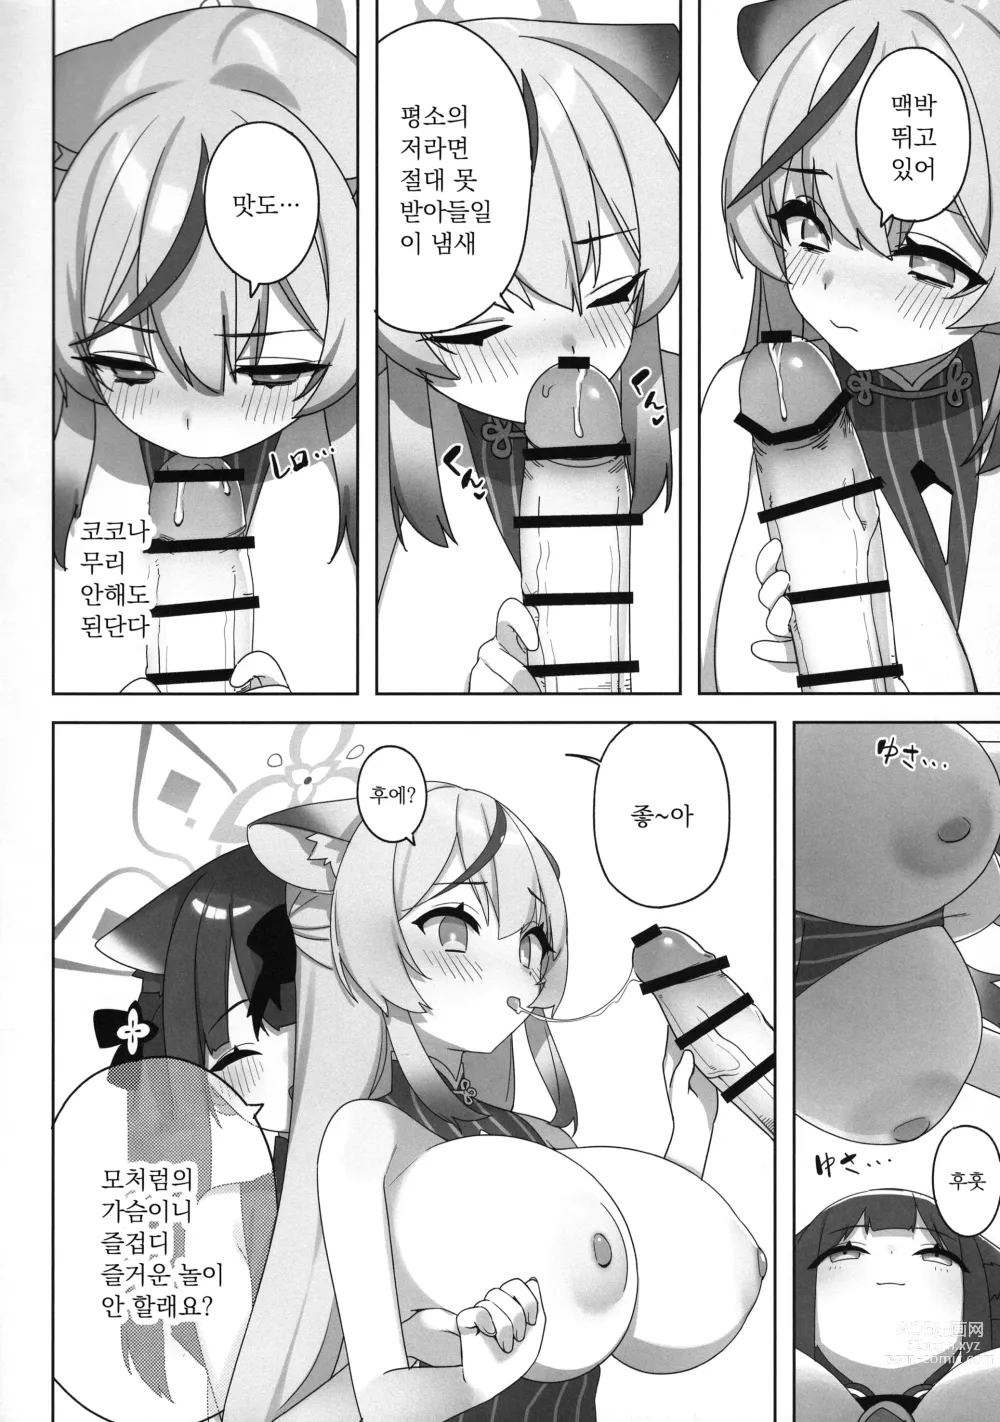 Page 7 of doujinshi Shuekoko Expansion - Live for oppai loli, Die for oppai loli